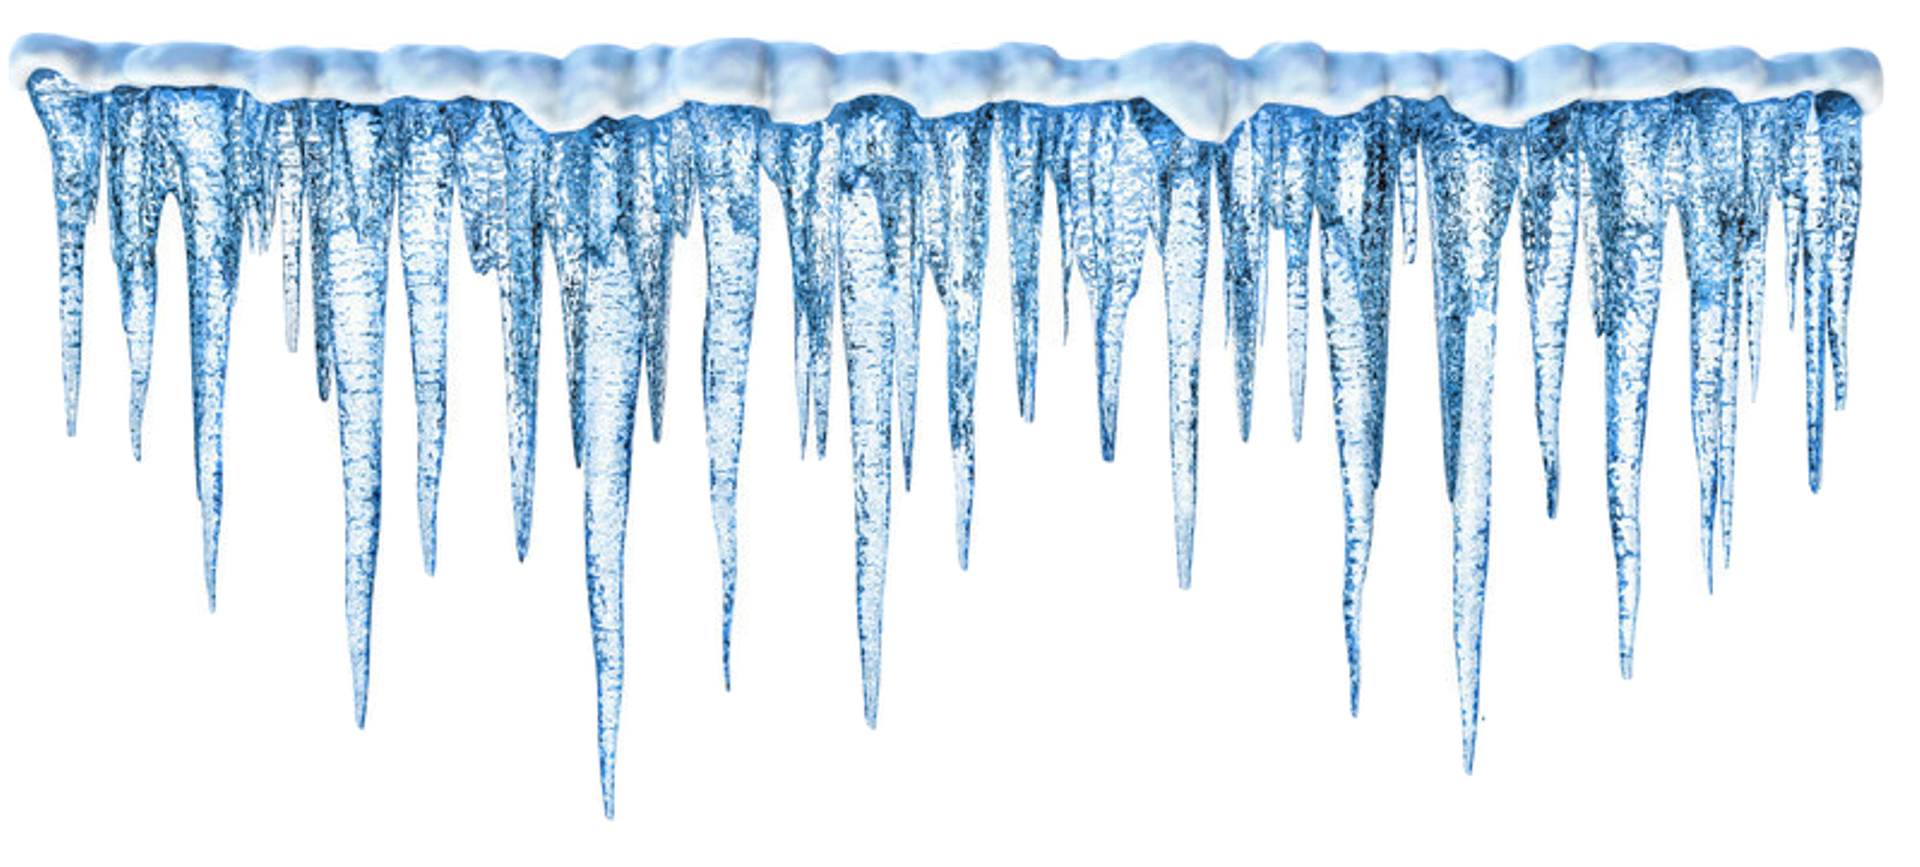 Icicles clipart stalactite. Icicle clip art others